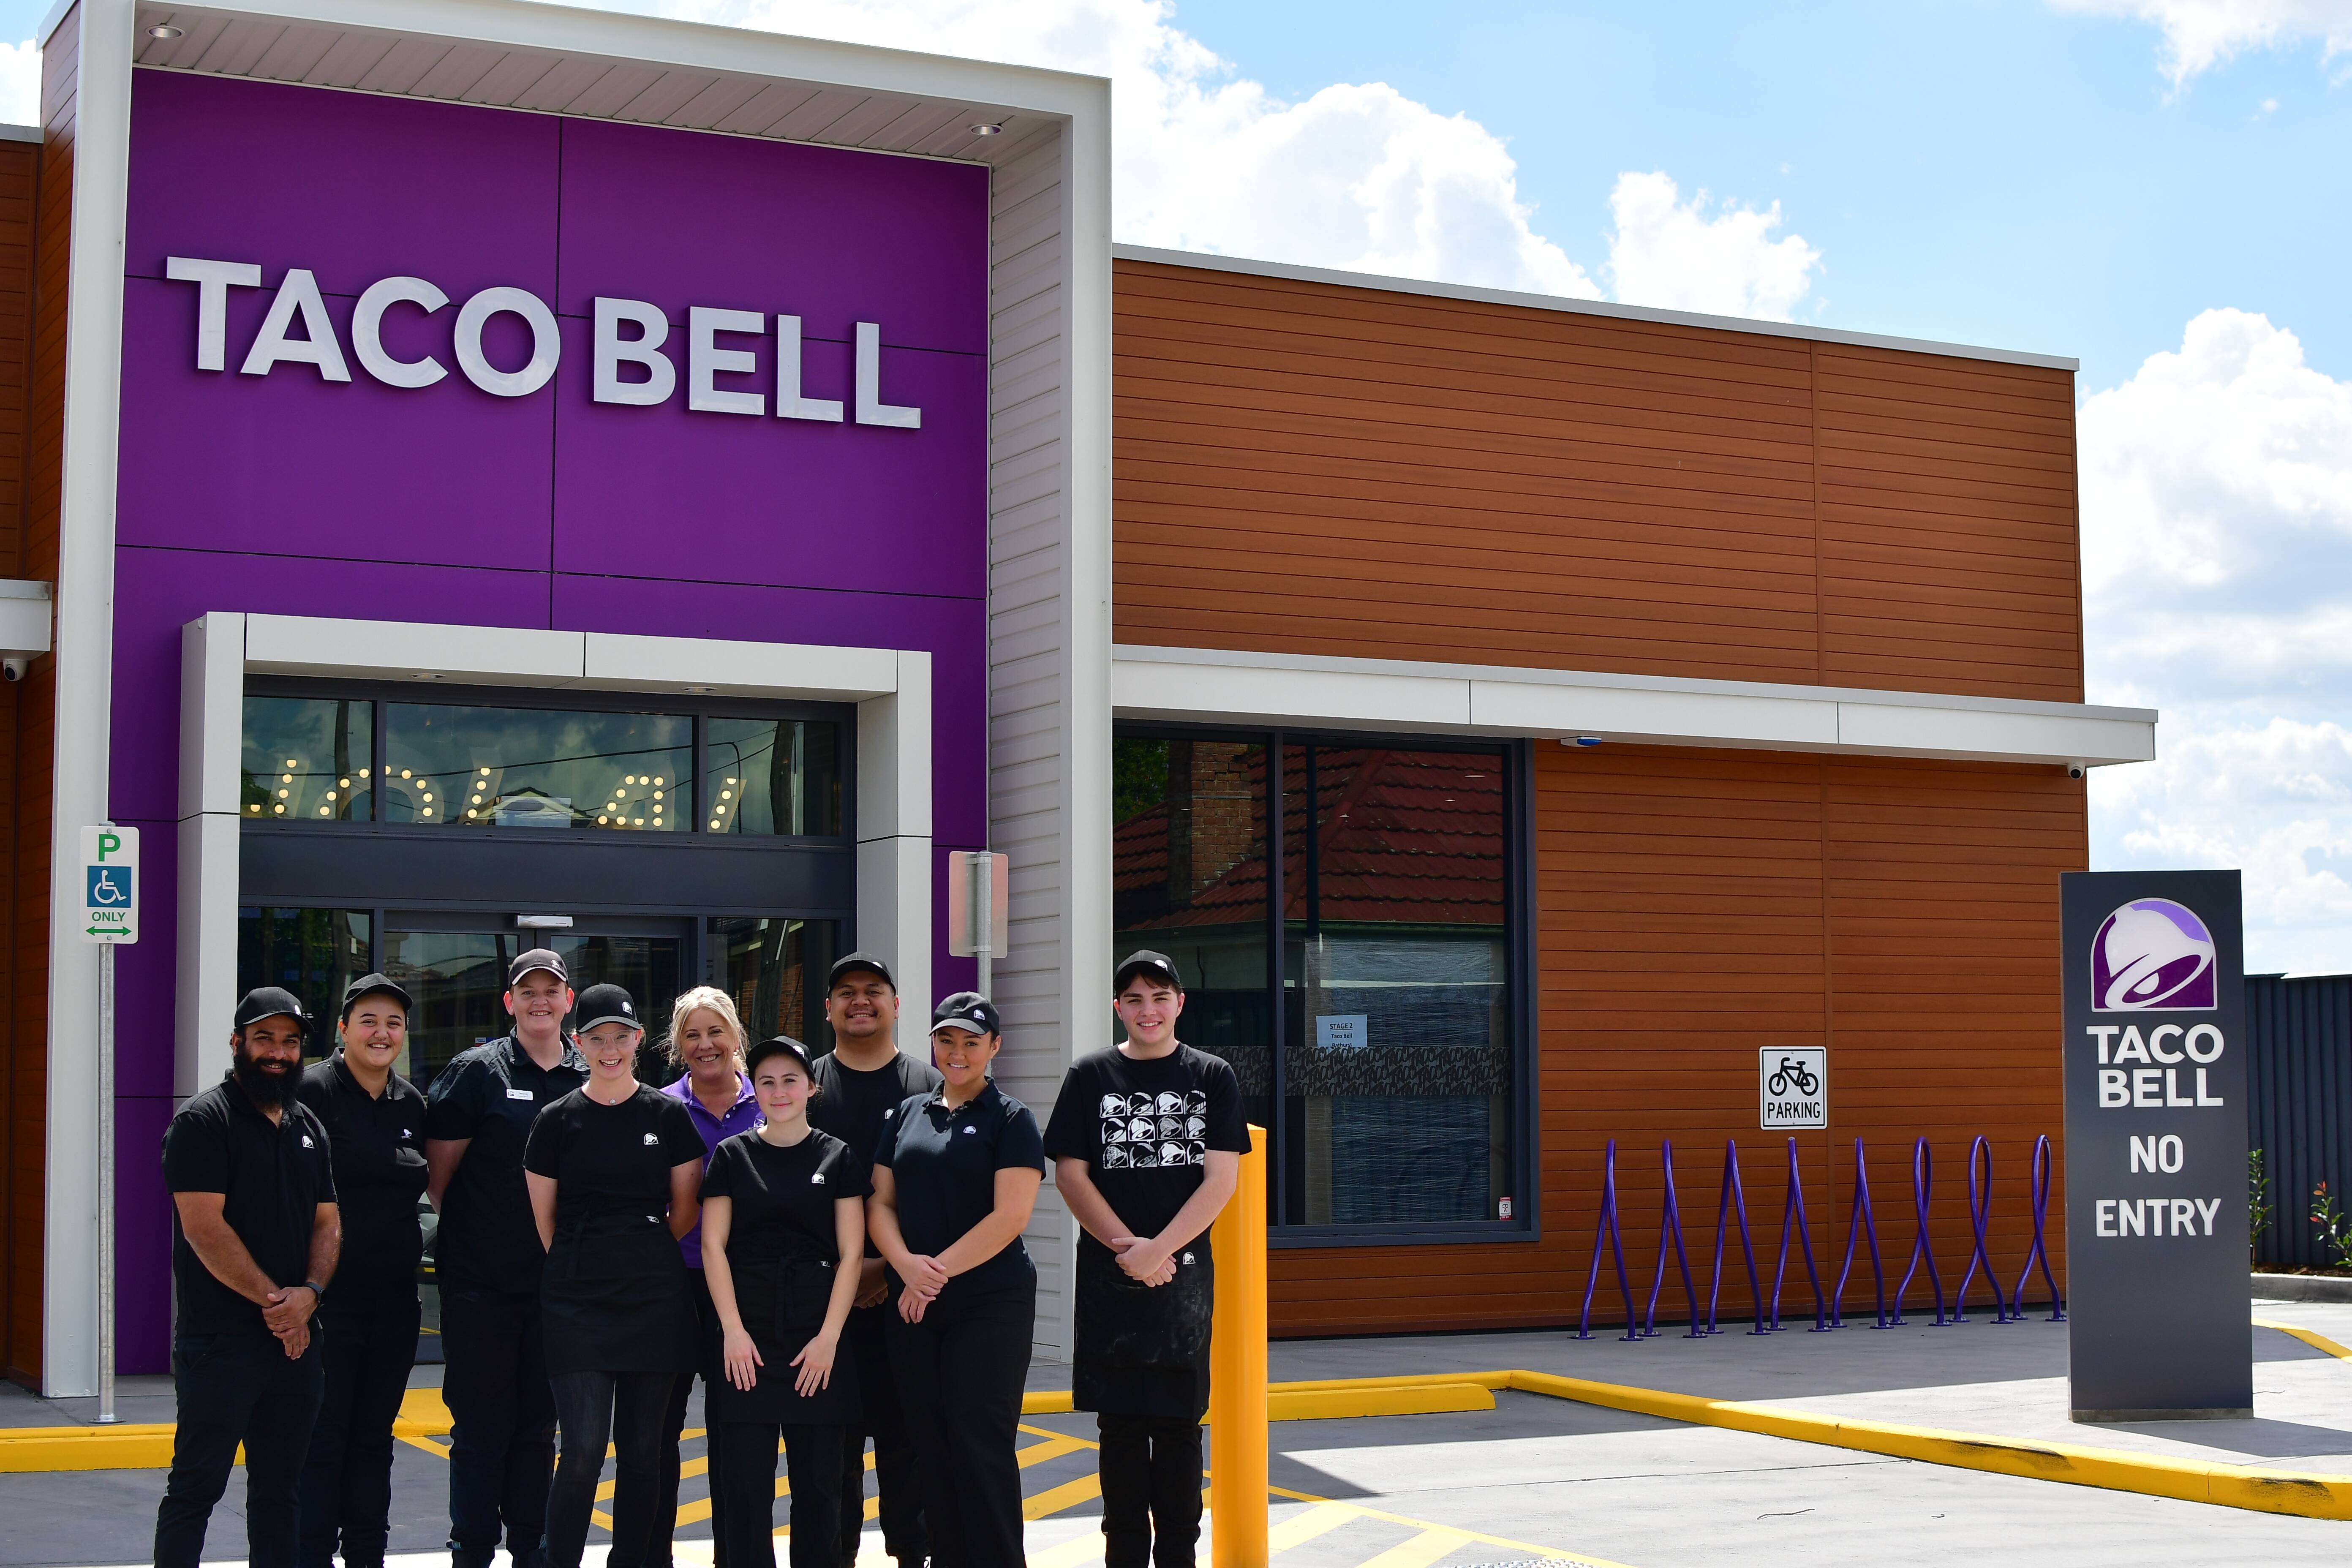 There's finally an opening date for Taco Bell Bathurst, Western Advocate